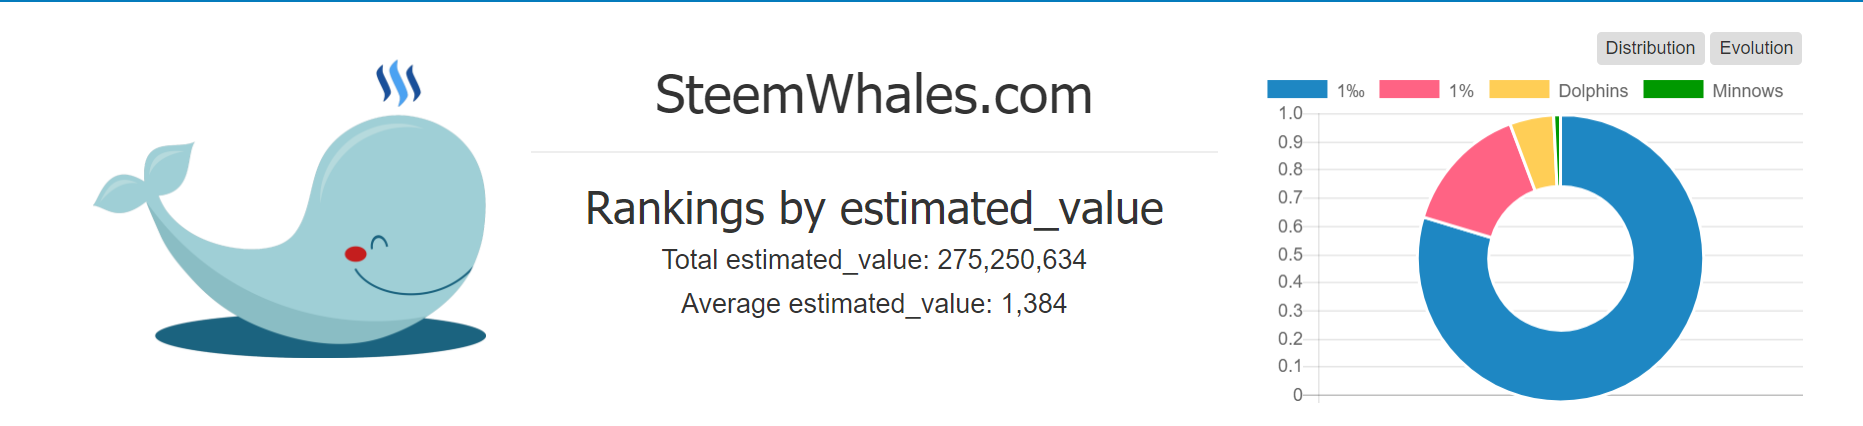 steenwhales.png